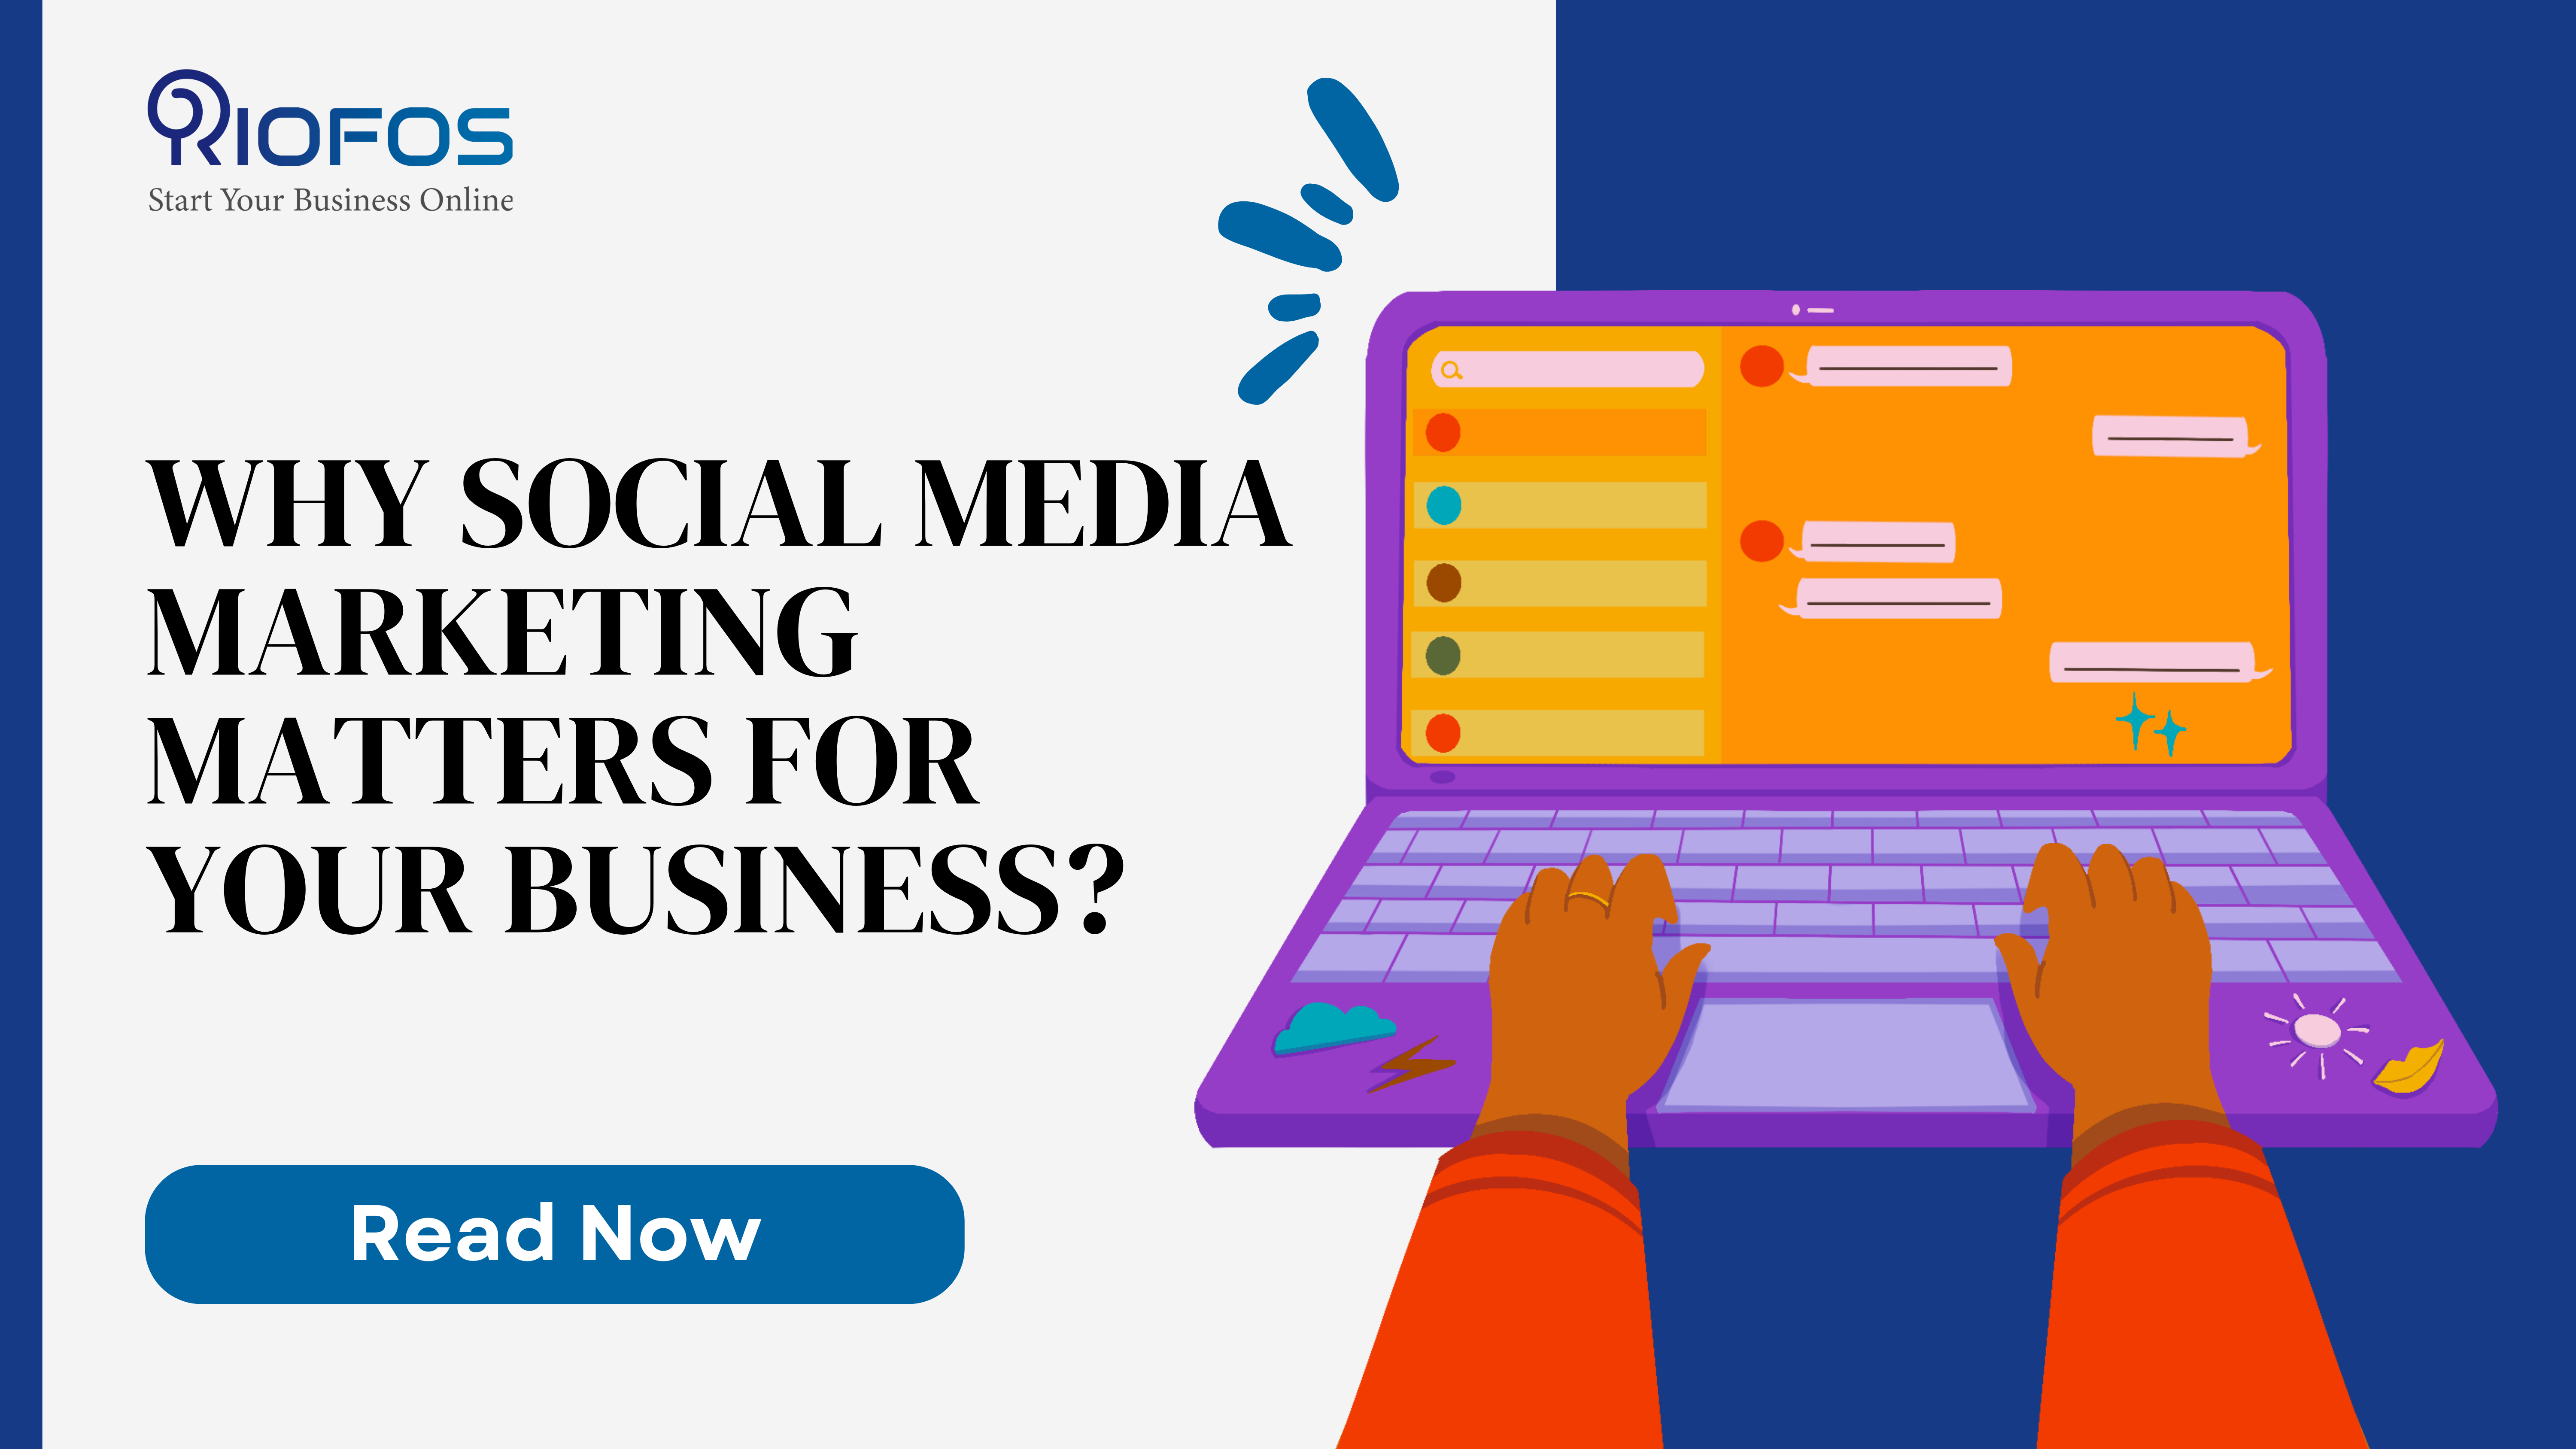 Why social media marketing matters for your business